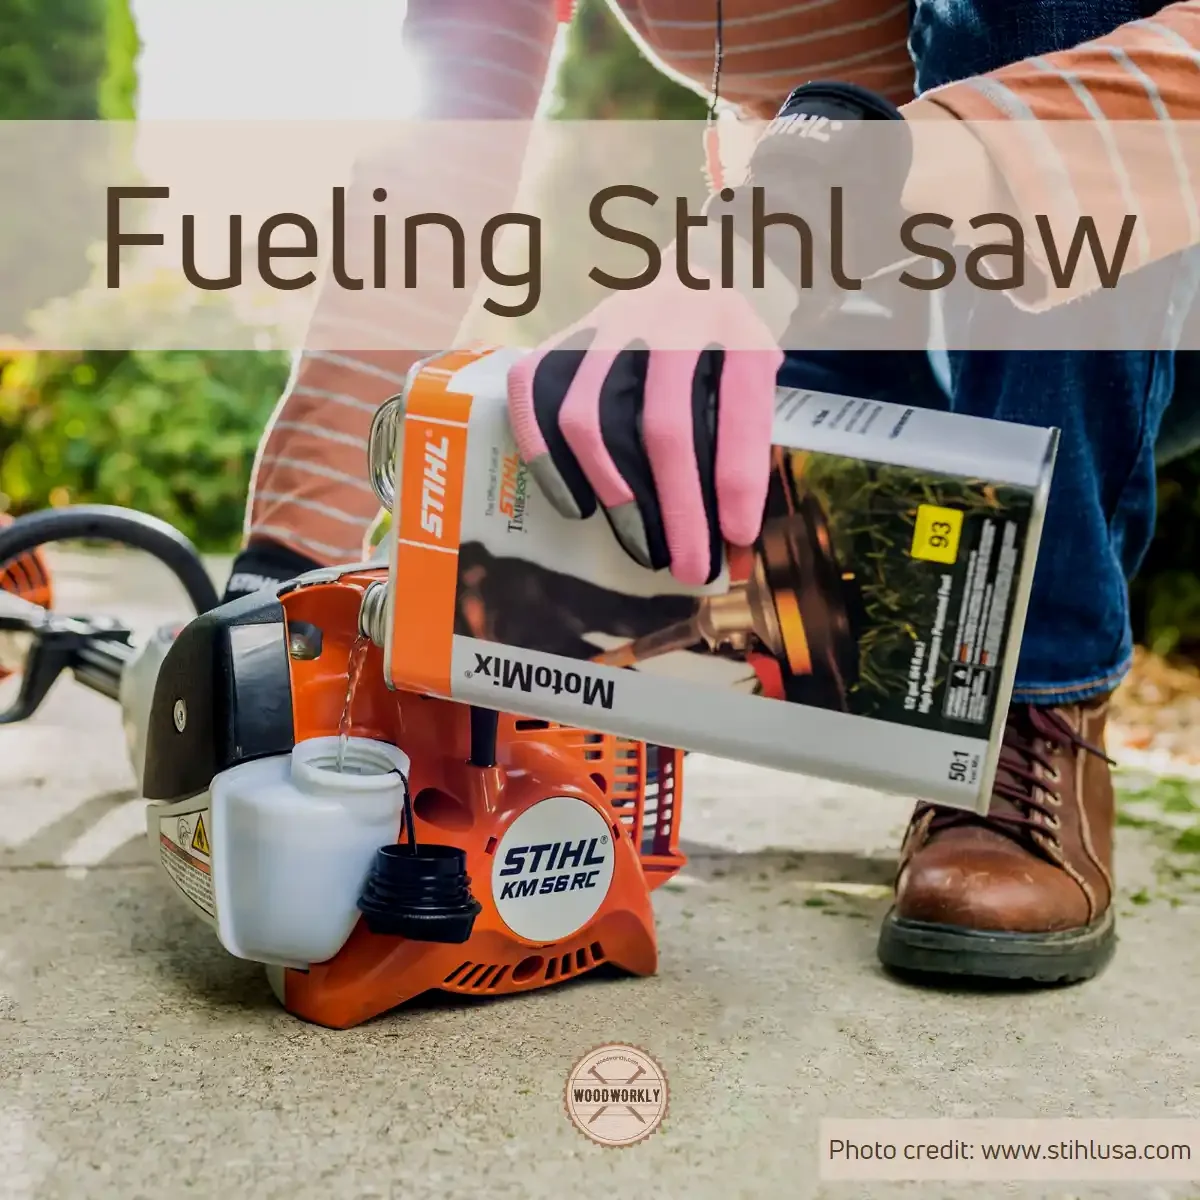 fueling the Stihl saw